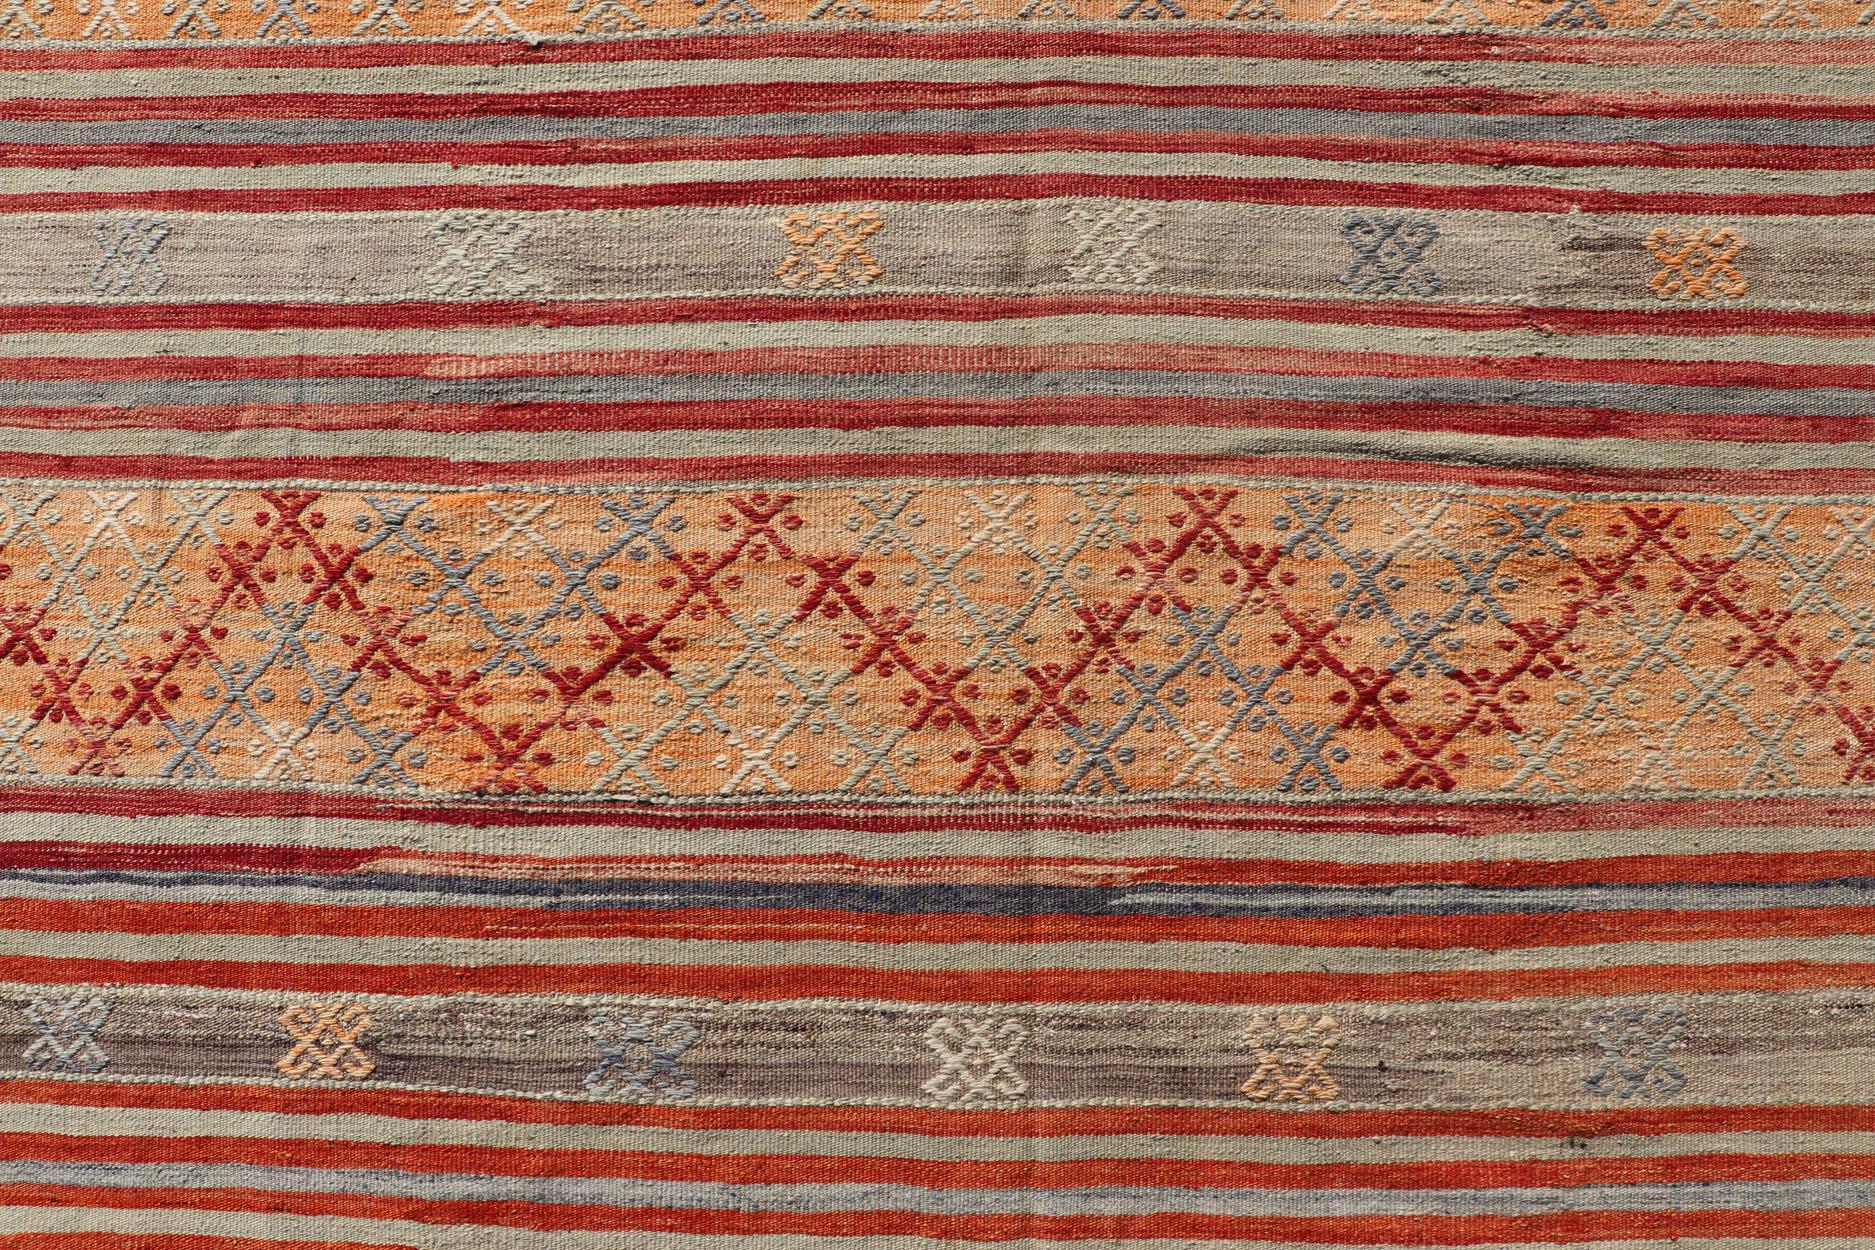 Colorful Vintage Turkish Embroidered Kilim with Stripes and Geometric Motifs  For Sale 4